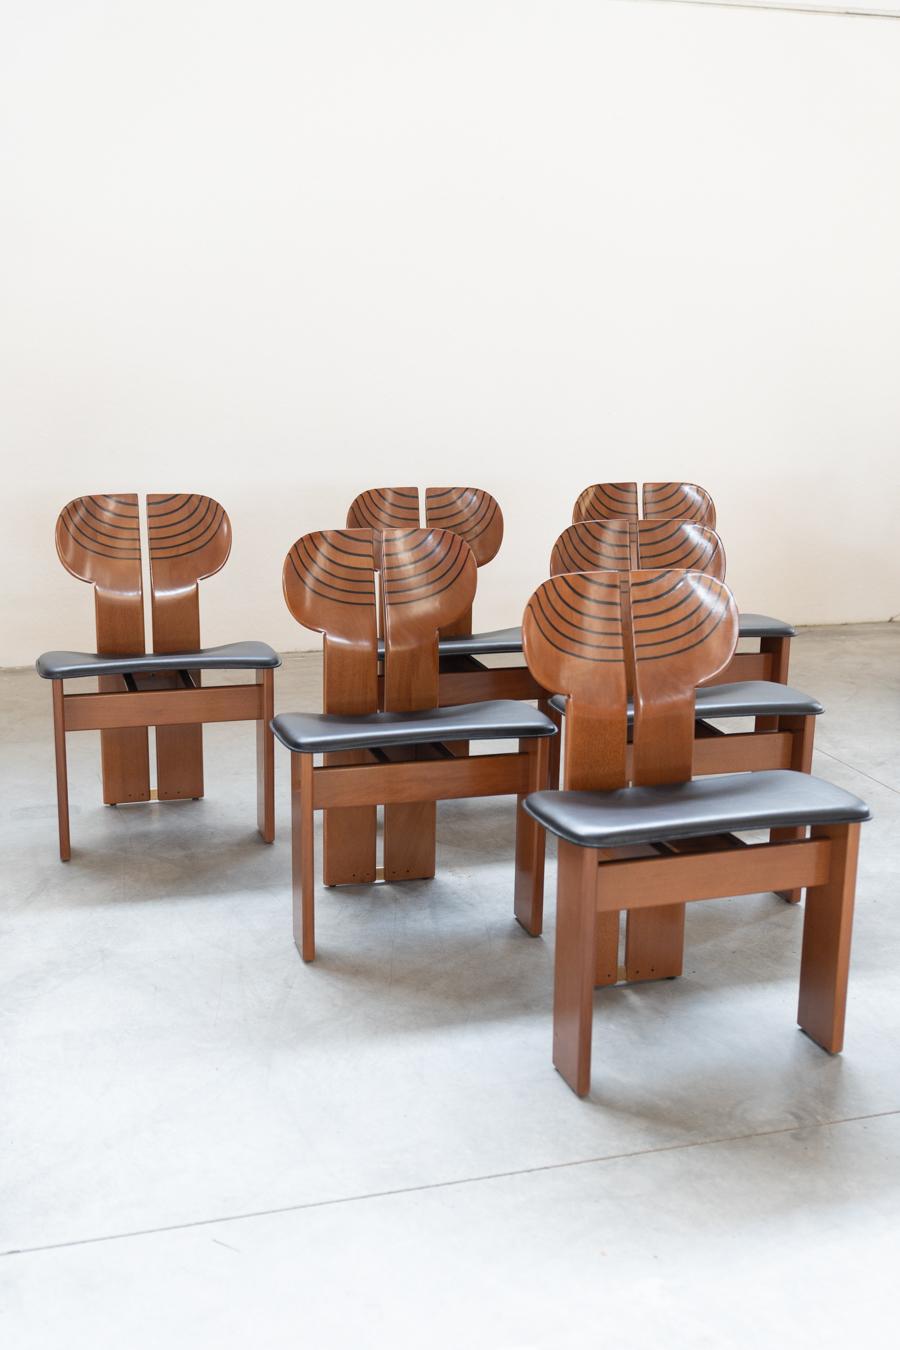 Set 12 chairs Afra & Tobia Scarpa mod. Africa - Gruppo Unico, 80/90 For Sale 11